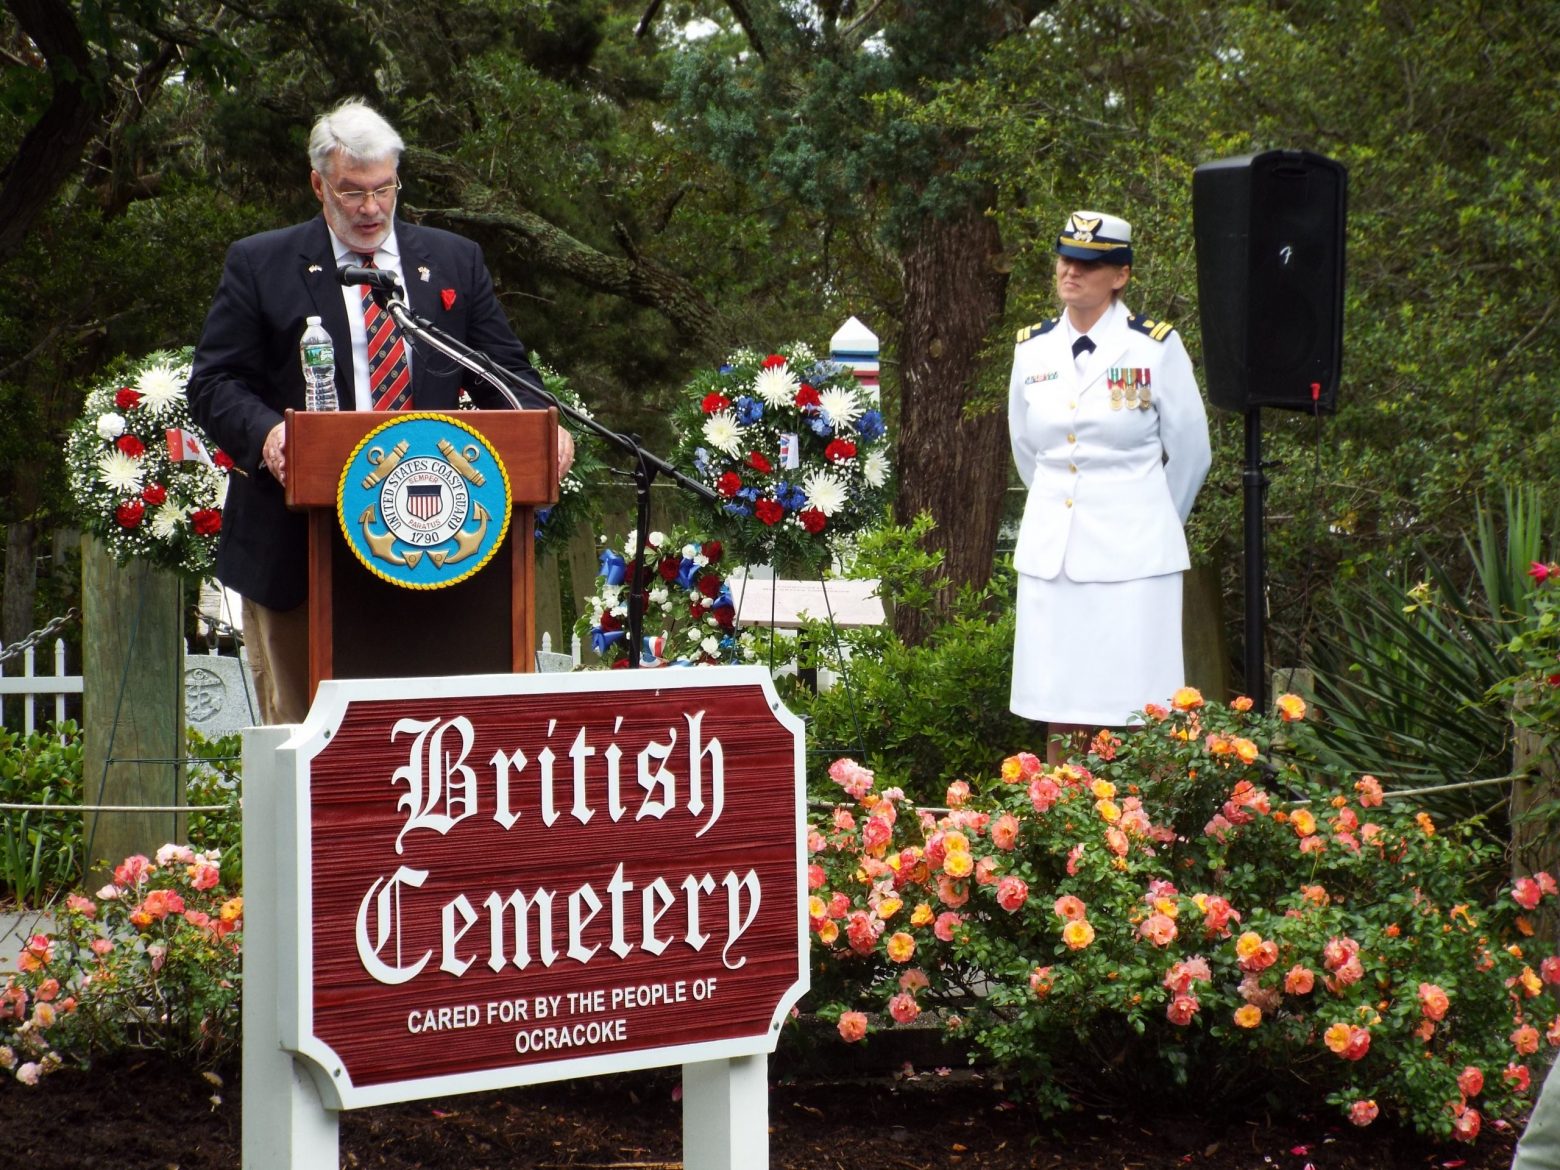 a man in a suit stands at a podium with a woman in a Navy uniform behind and to his left looking on. sign in front reads british cemetery